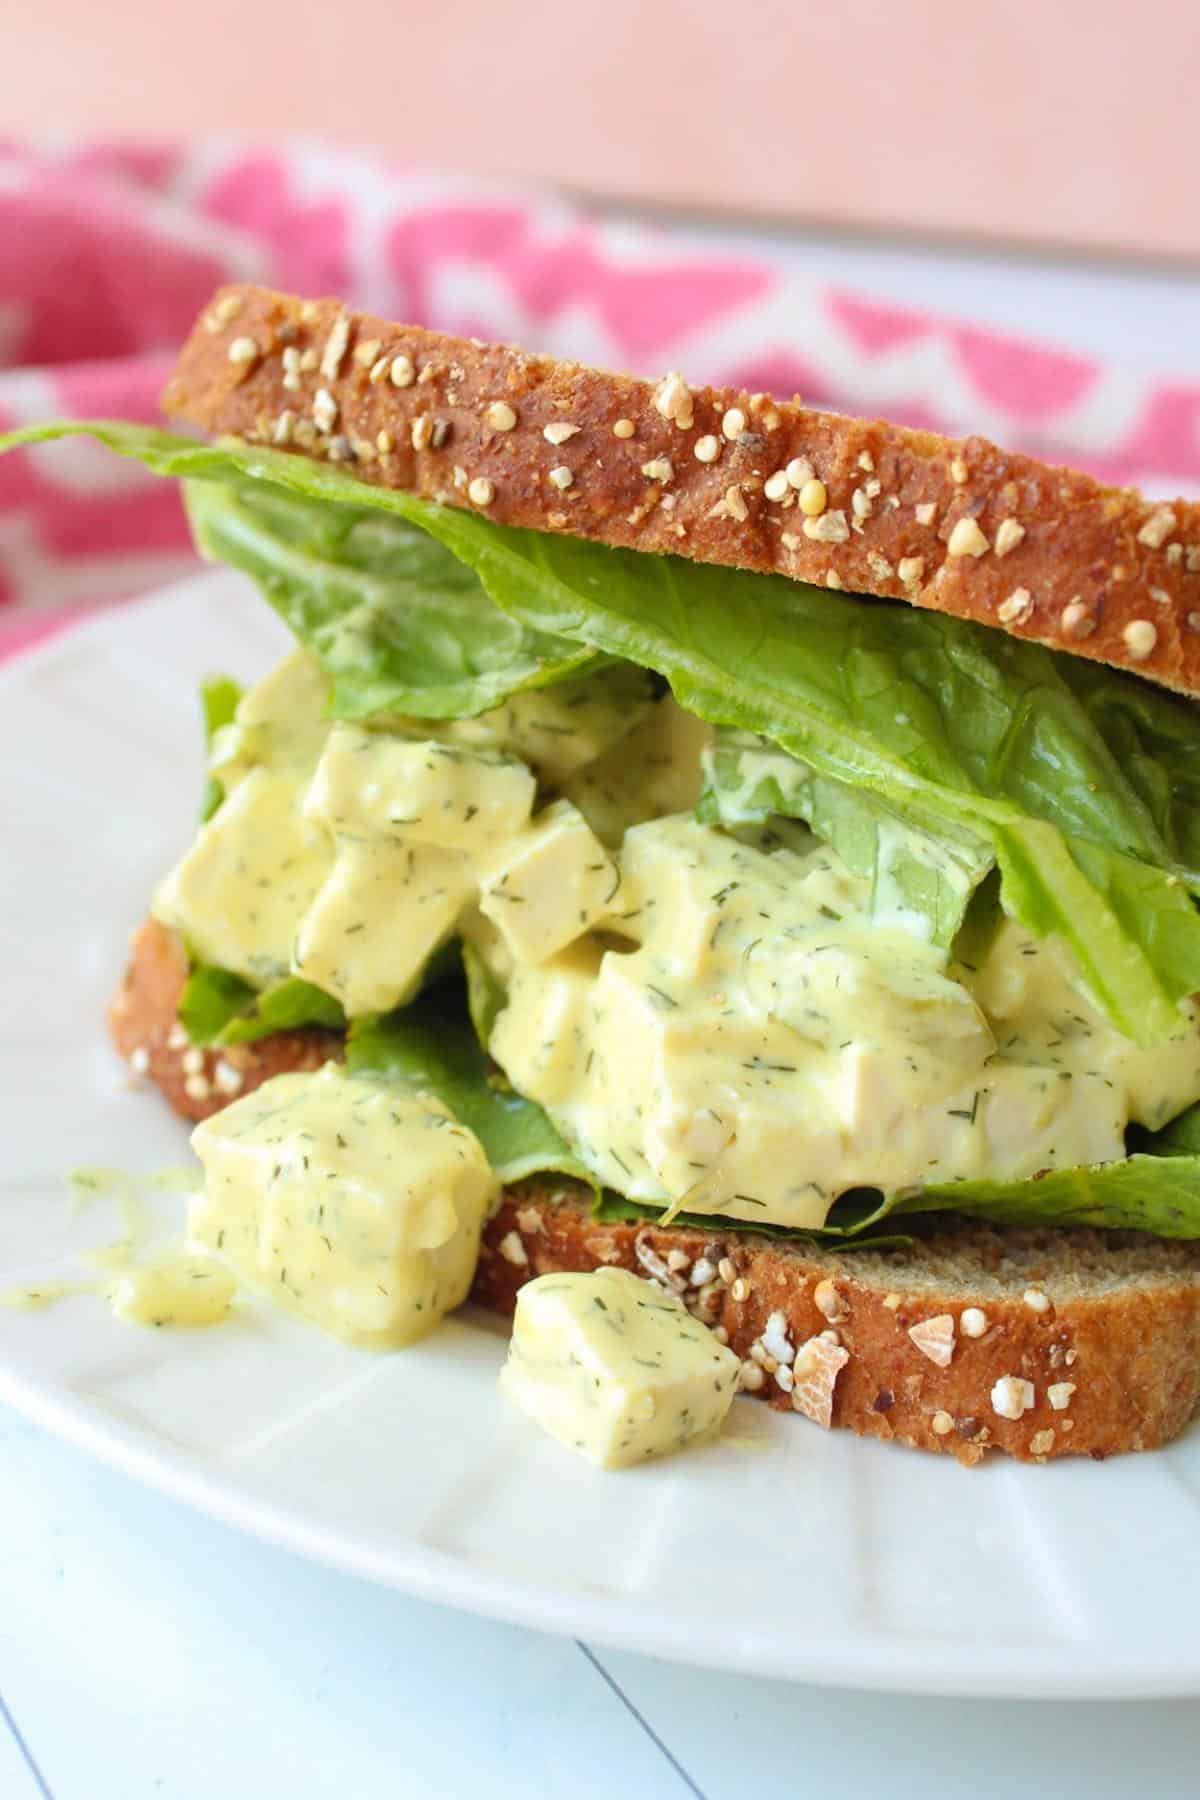 Vegan egg salad sandwich on a piece of bread with lettuce